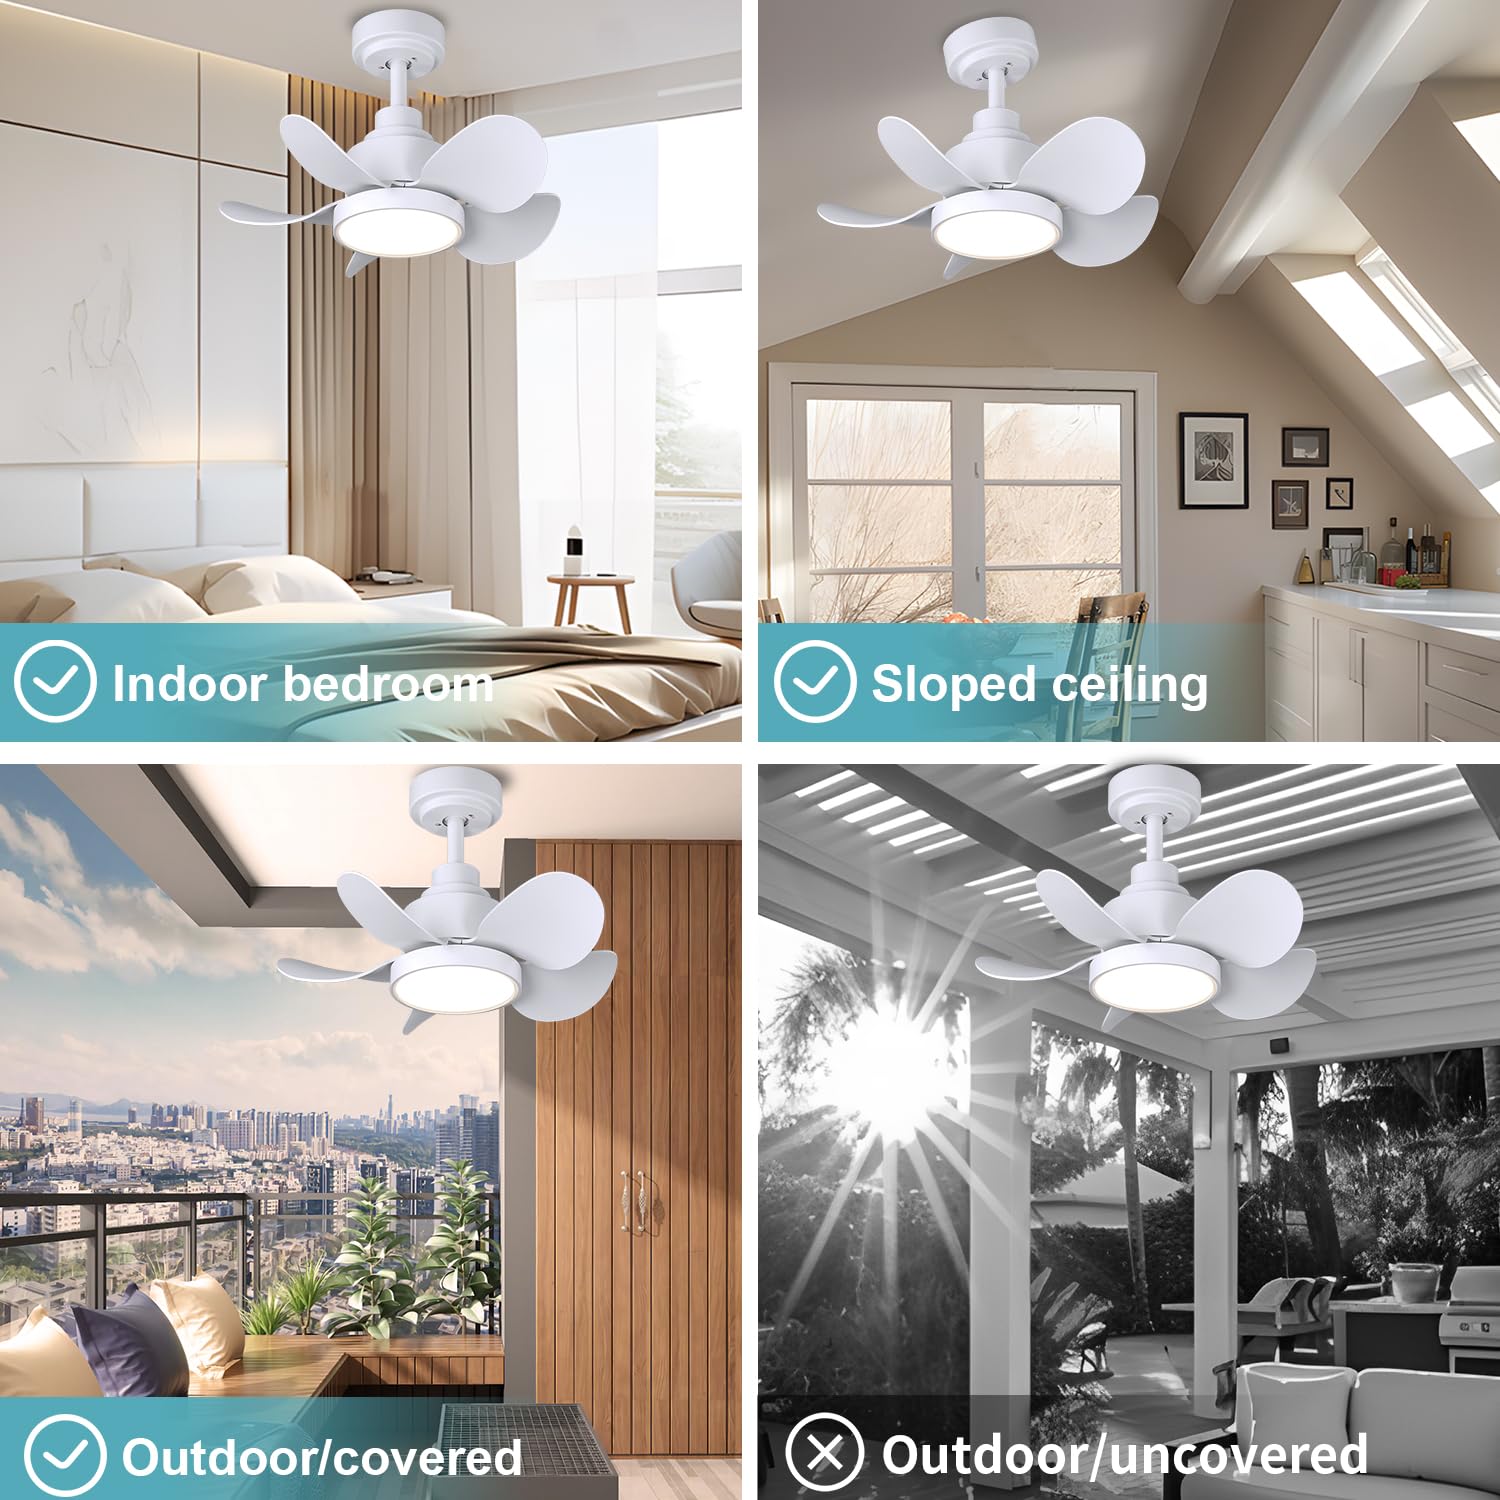 CJOY 22 inch Ceiling Fan with Lights, Small White Fan with Remote, LED Light, DC Quiet Motor, 5 Reversible Blades Ceiling Fans for Bedroom/Living Room/Small Space